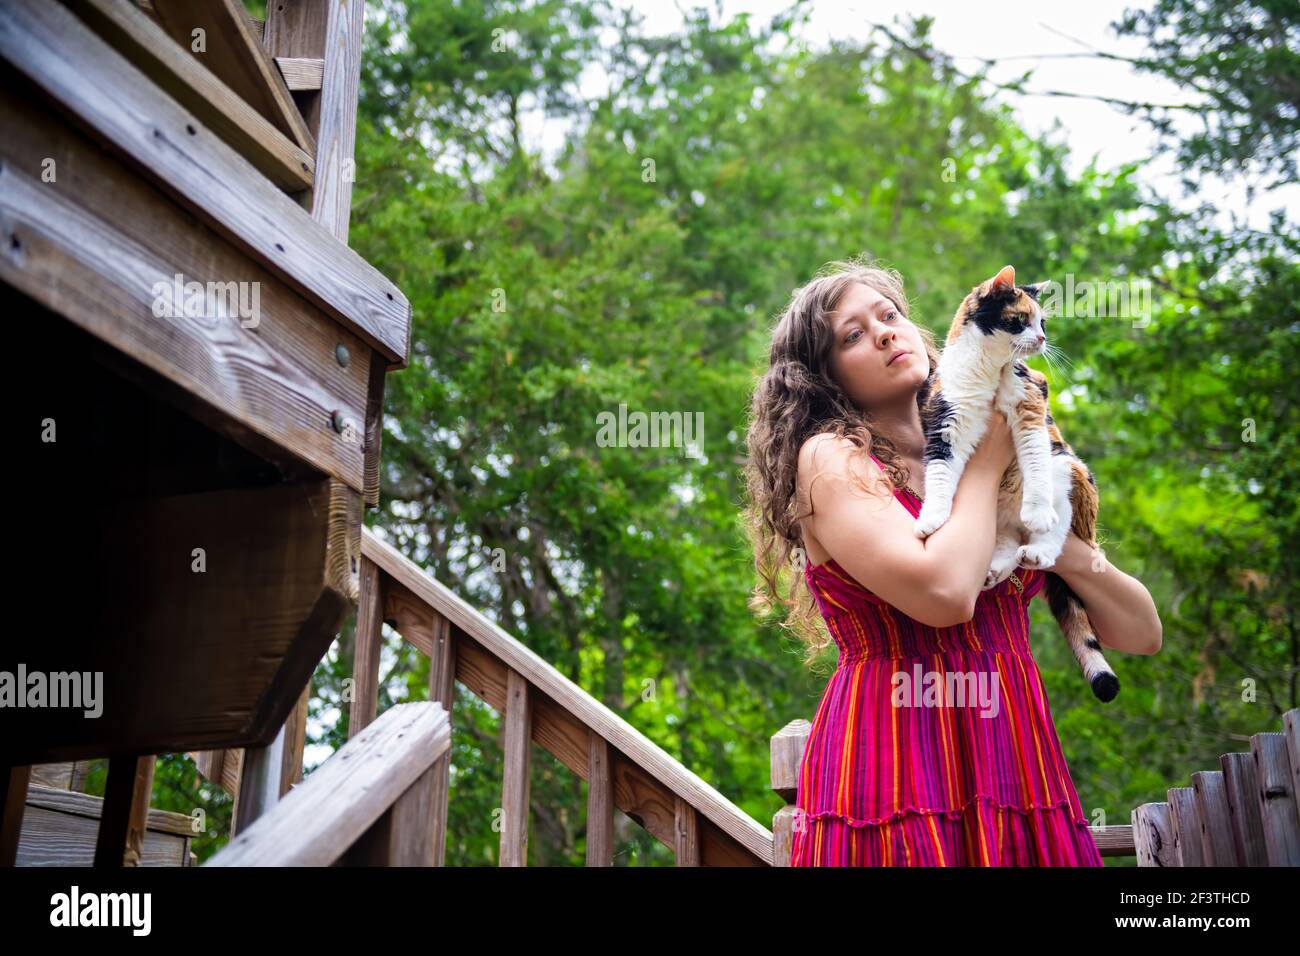 Happy smiling young woman bonding holding in hands calico cat pet companion, friends showing affection outside outdoors in home garden on wooden deck Stock Photo